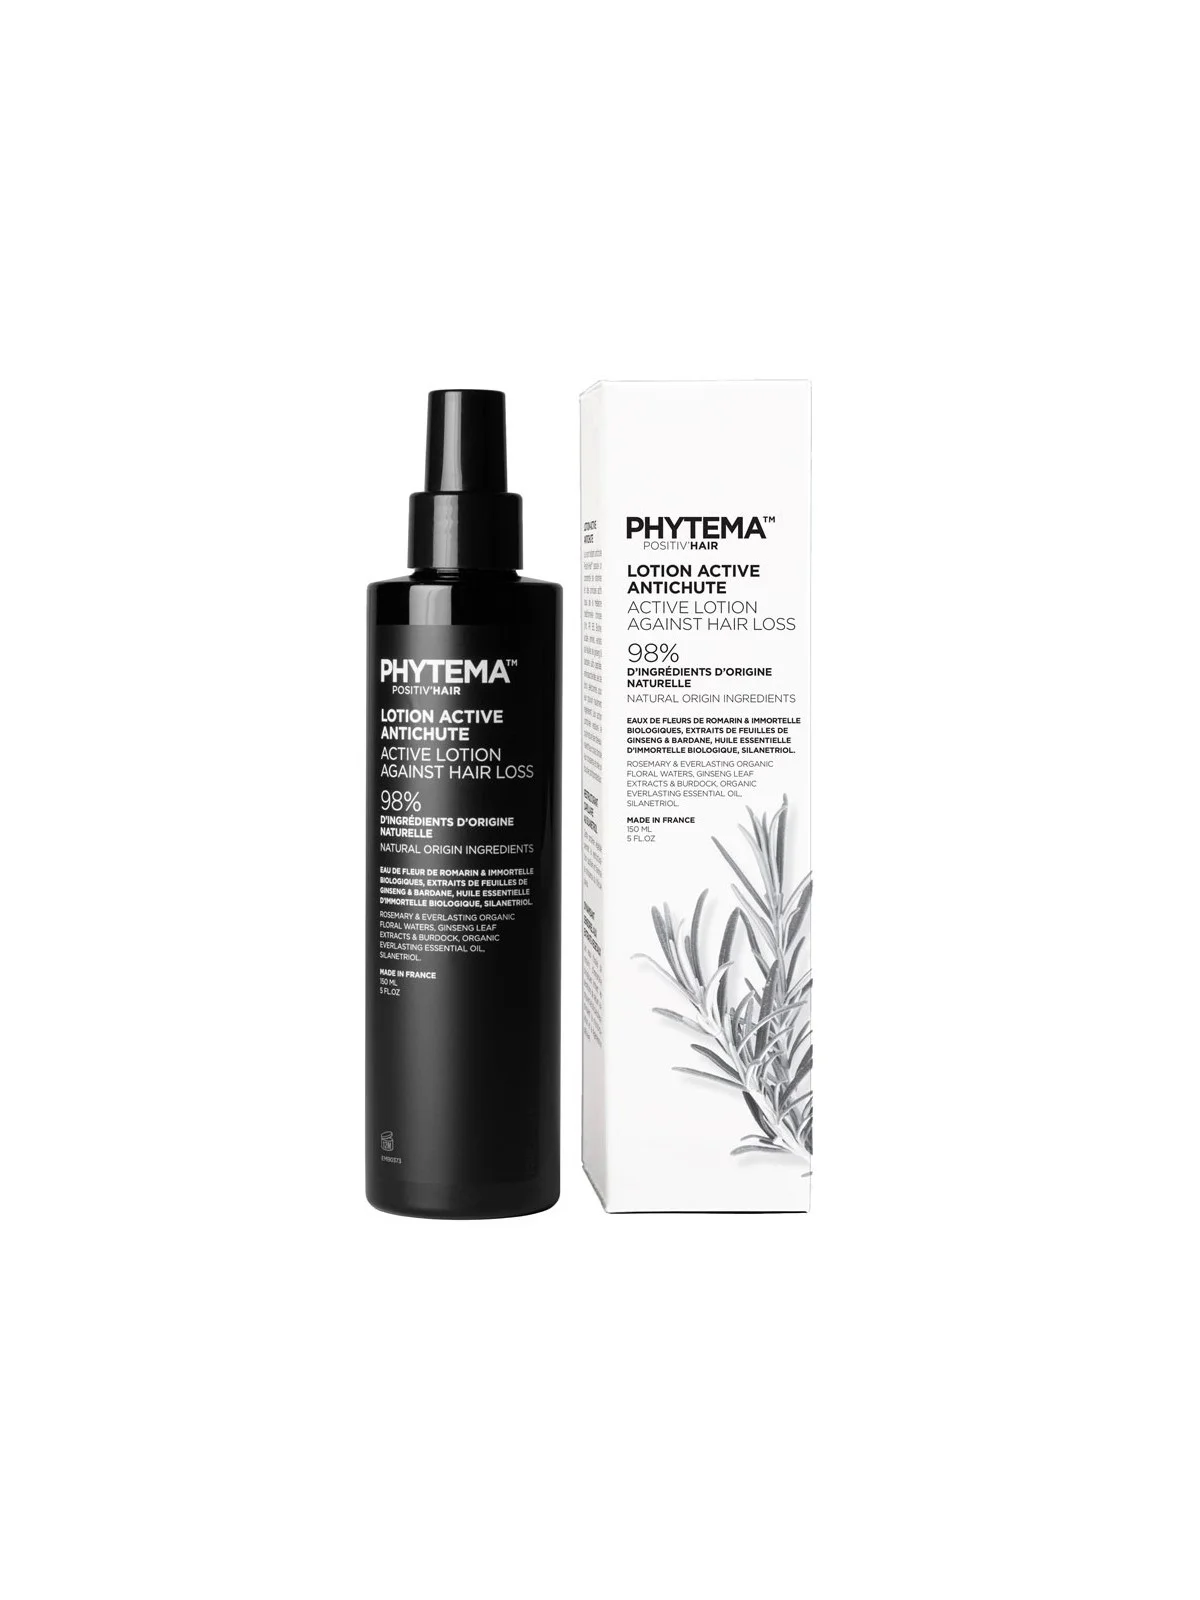 POSITIV'HAIR LOTION ACTIVE ANTICHUTE PHYTEMA